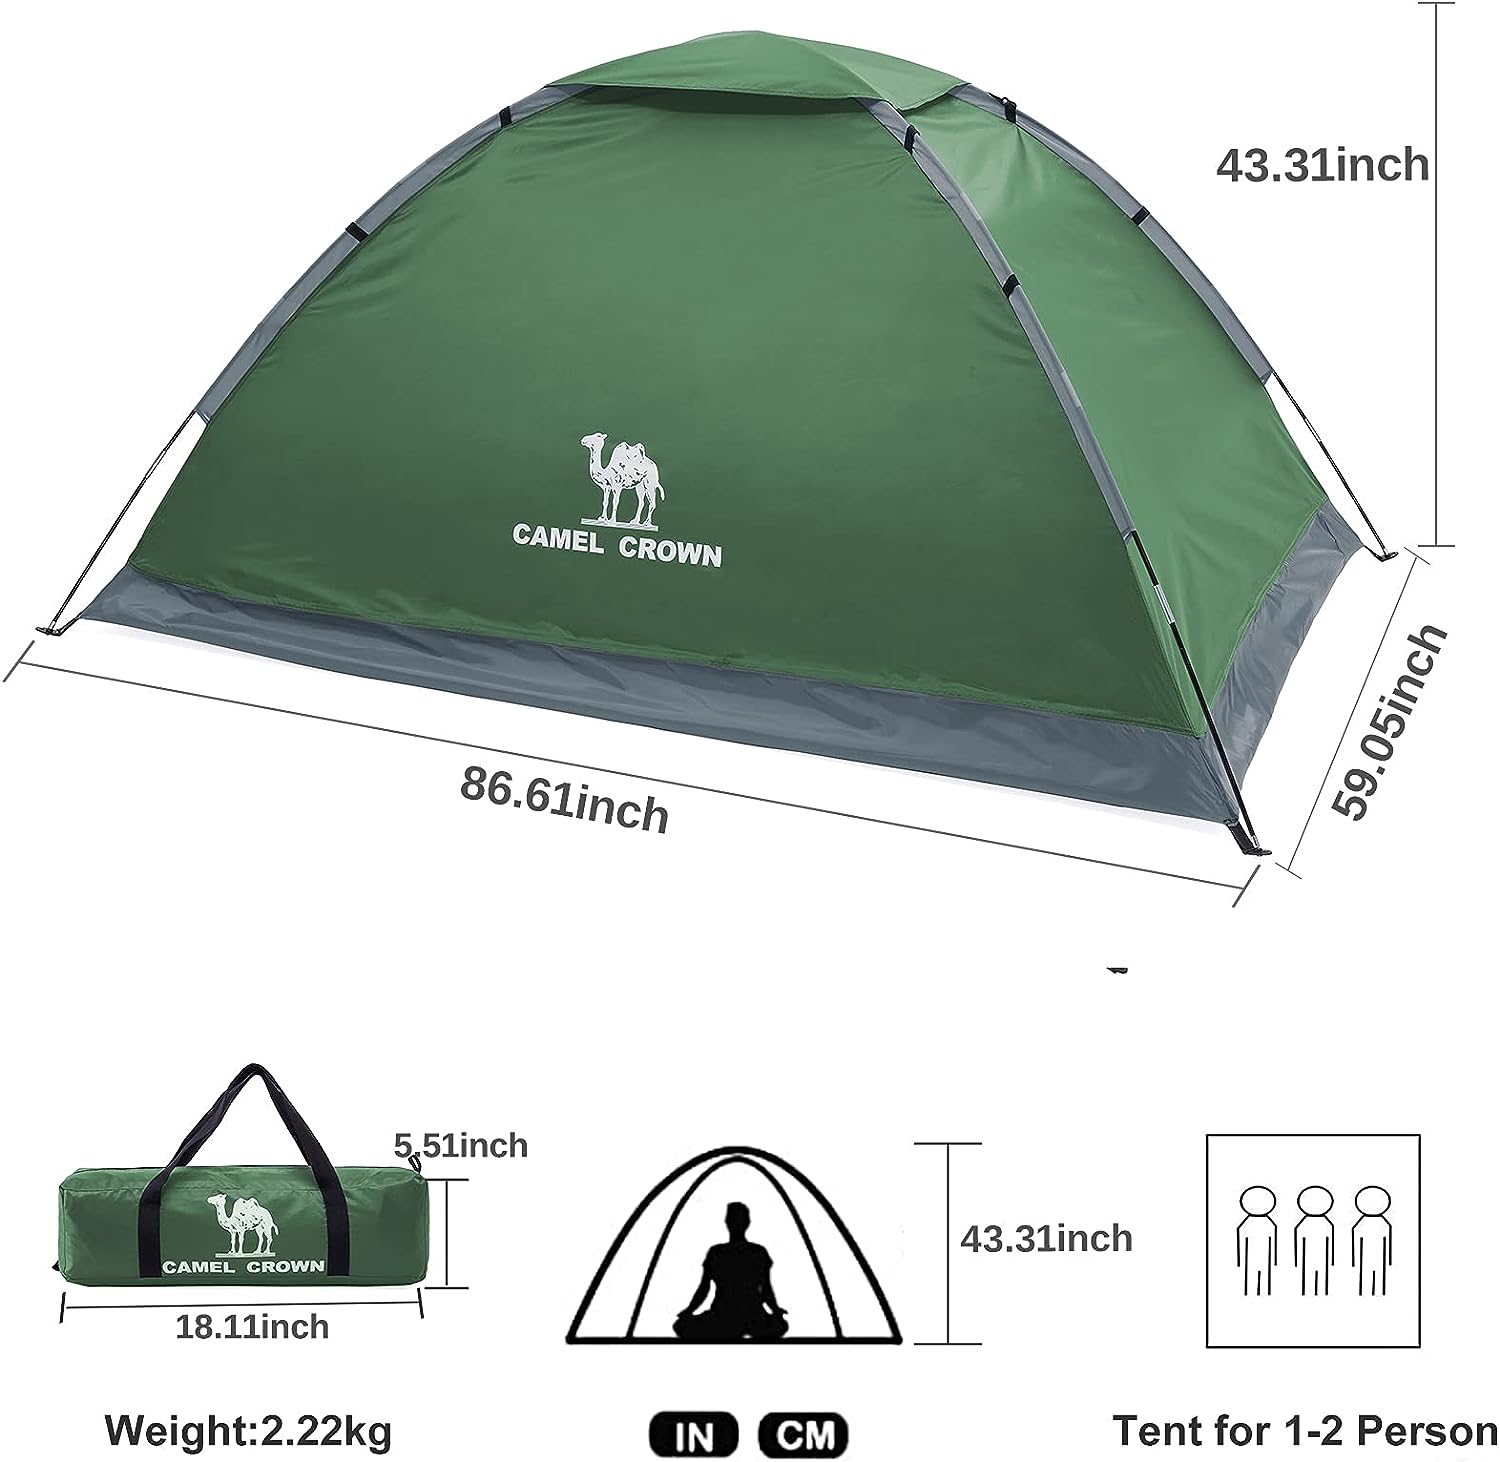 camel crown dome tent size